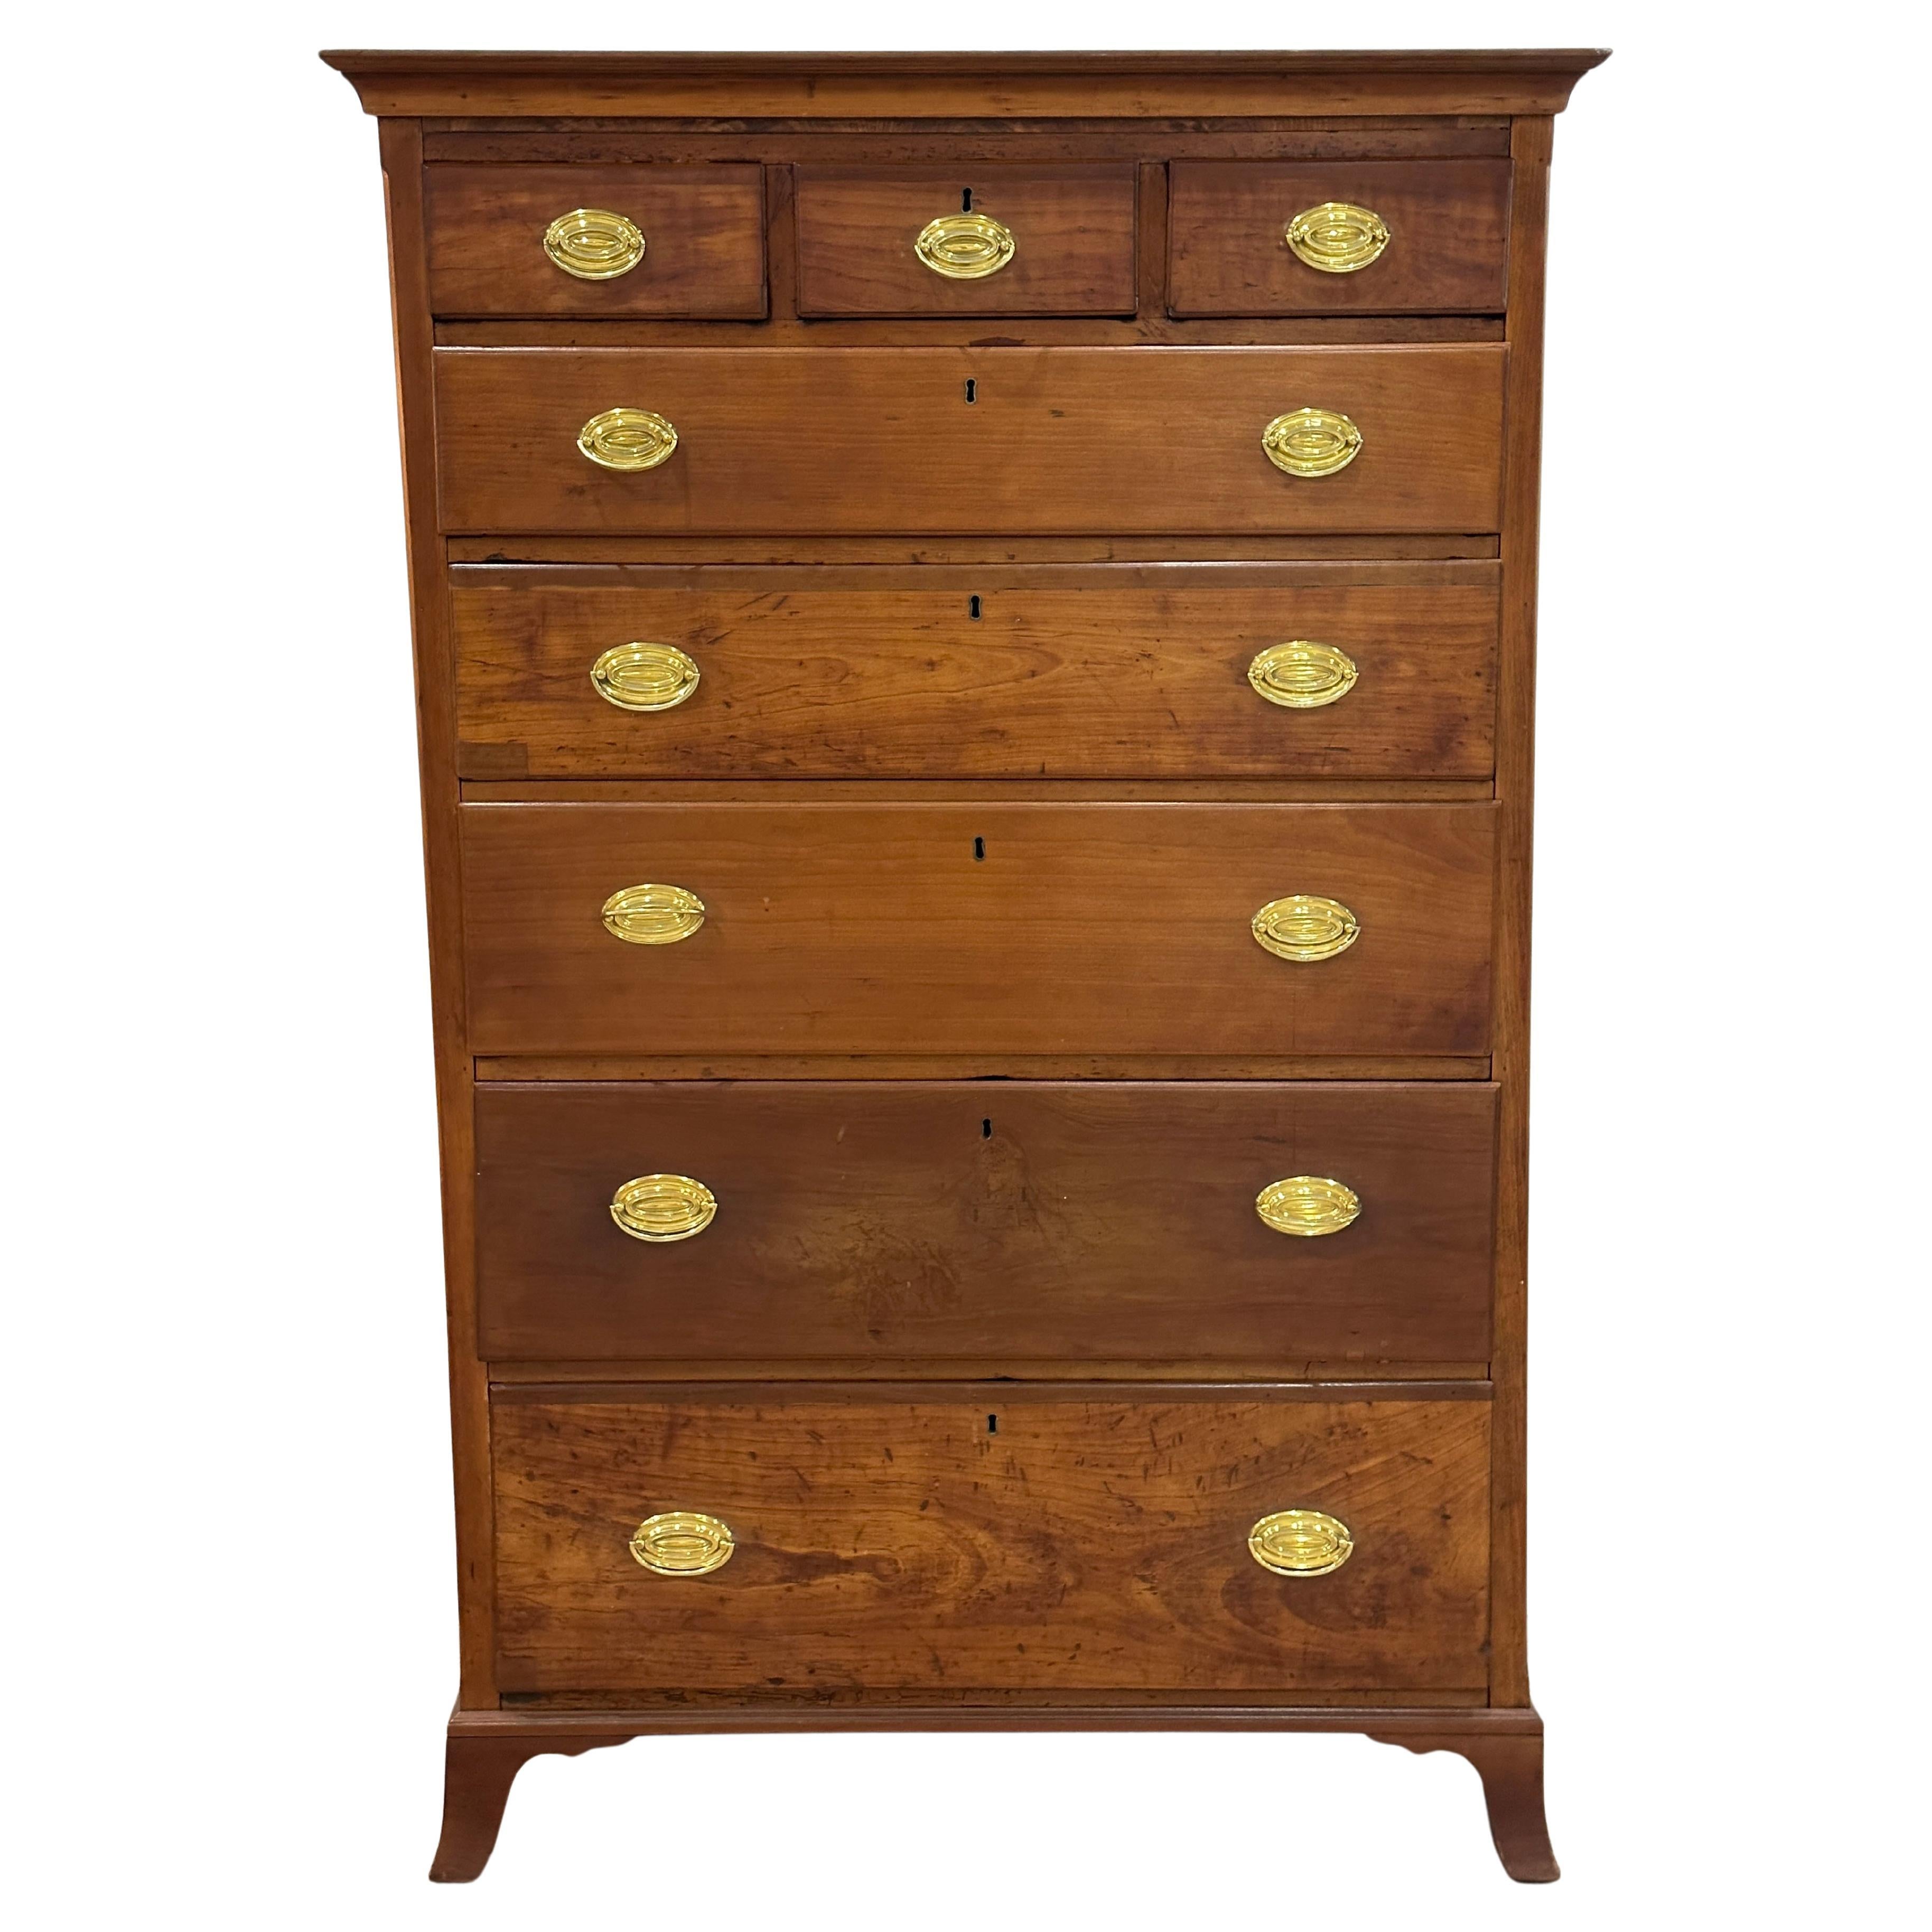 Early 19th Century American Cherrywood Tall Chest For Sale